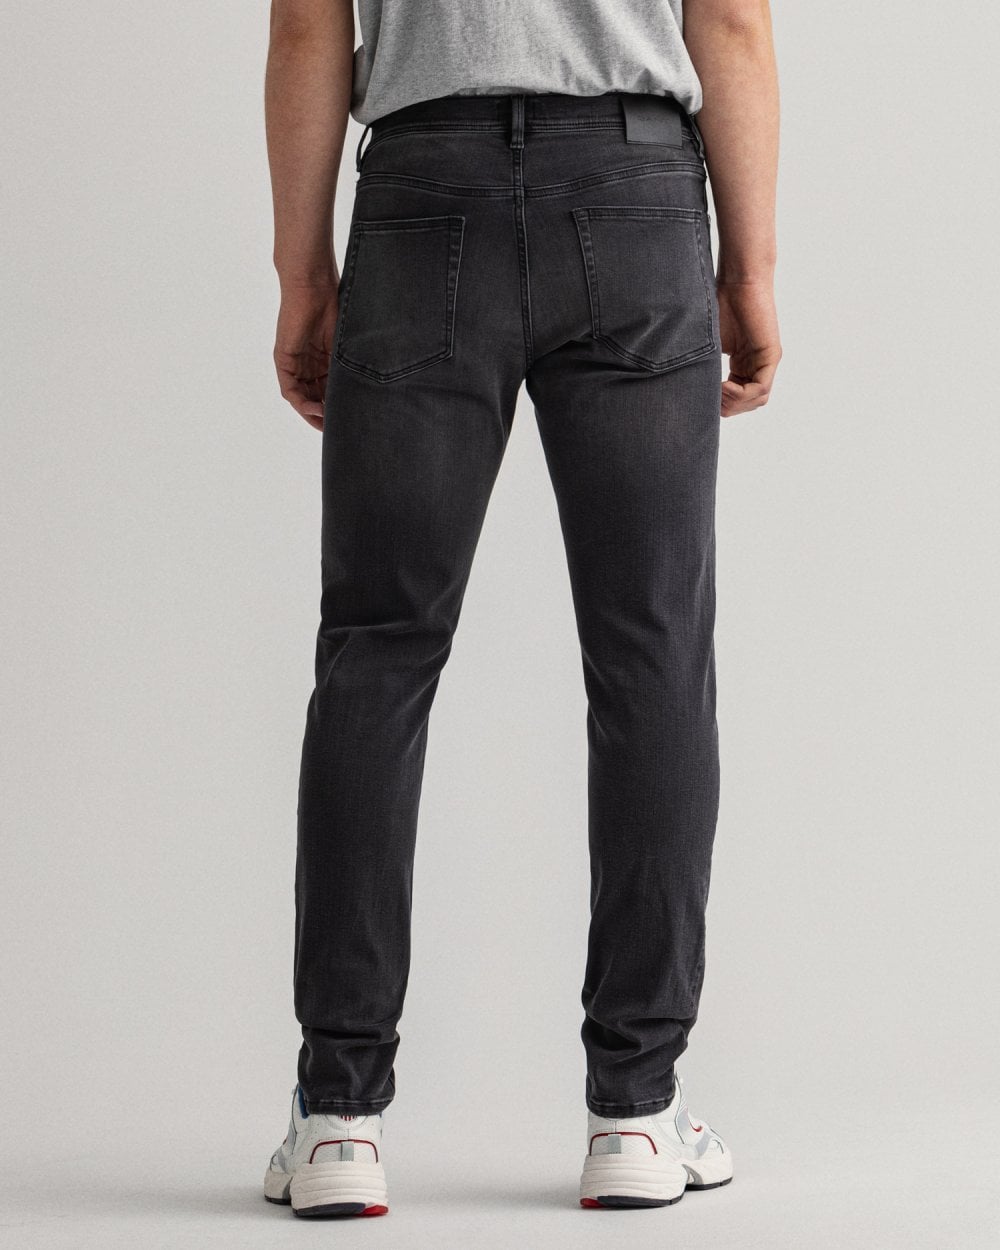 Maxen Extra Slim Fit Active-Recover Black Jeans